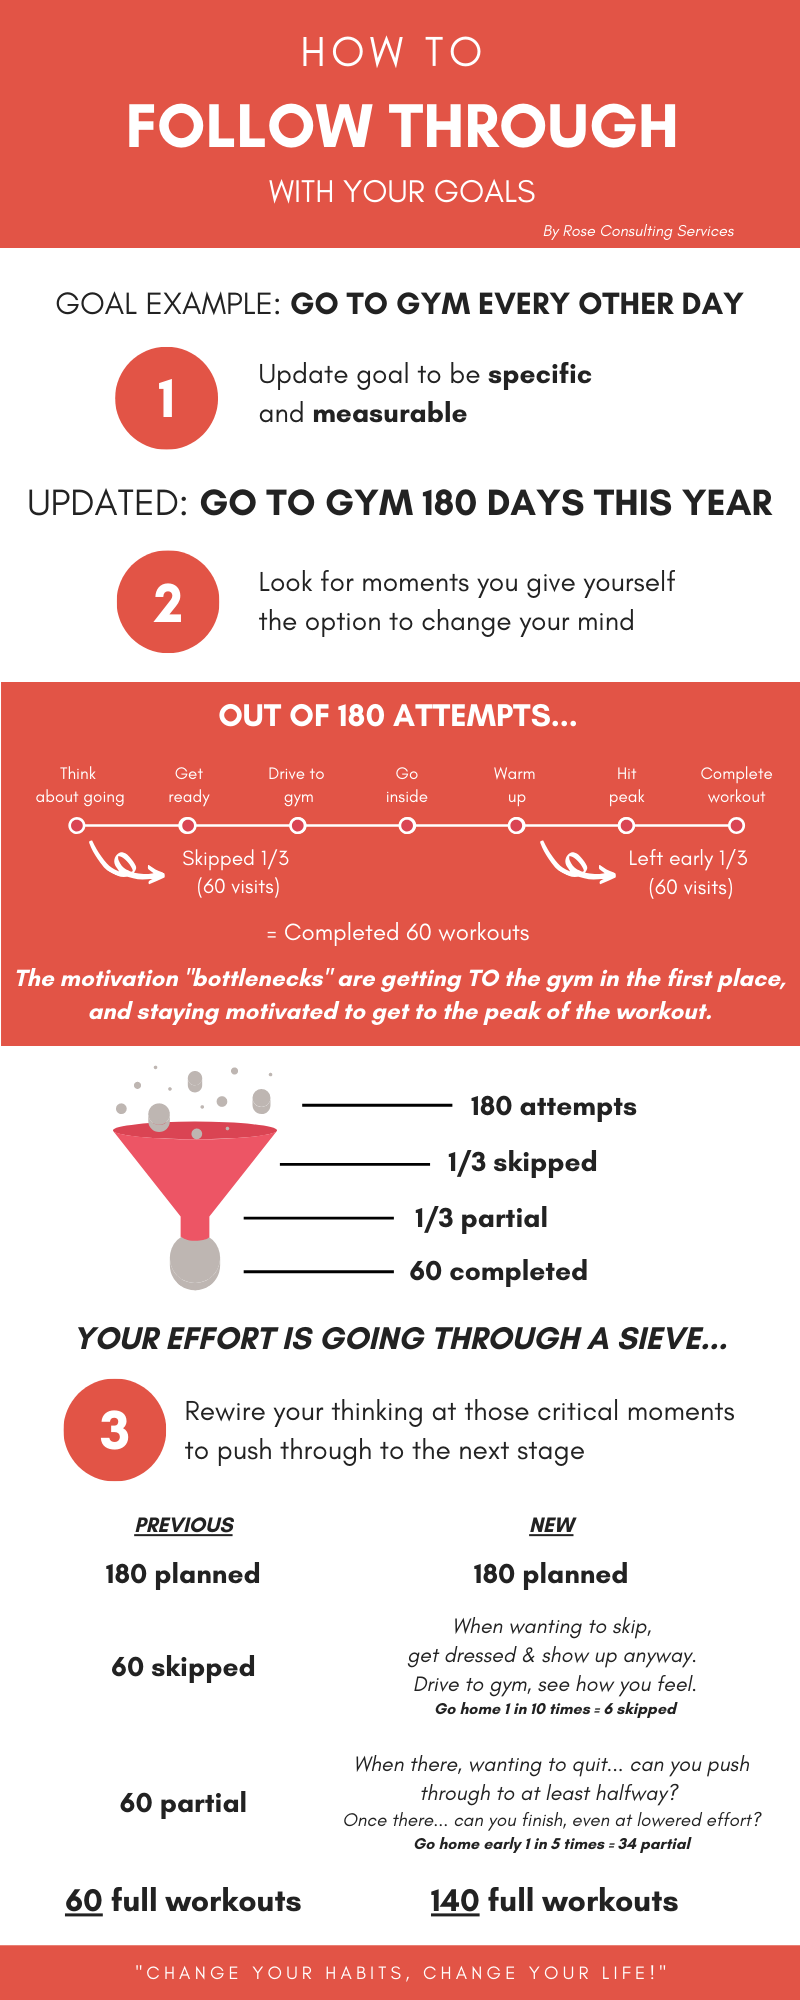 Infographic: How to Follow Through with Your Goals
								